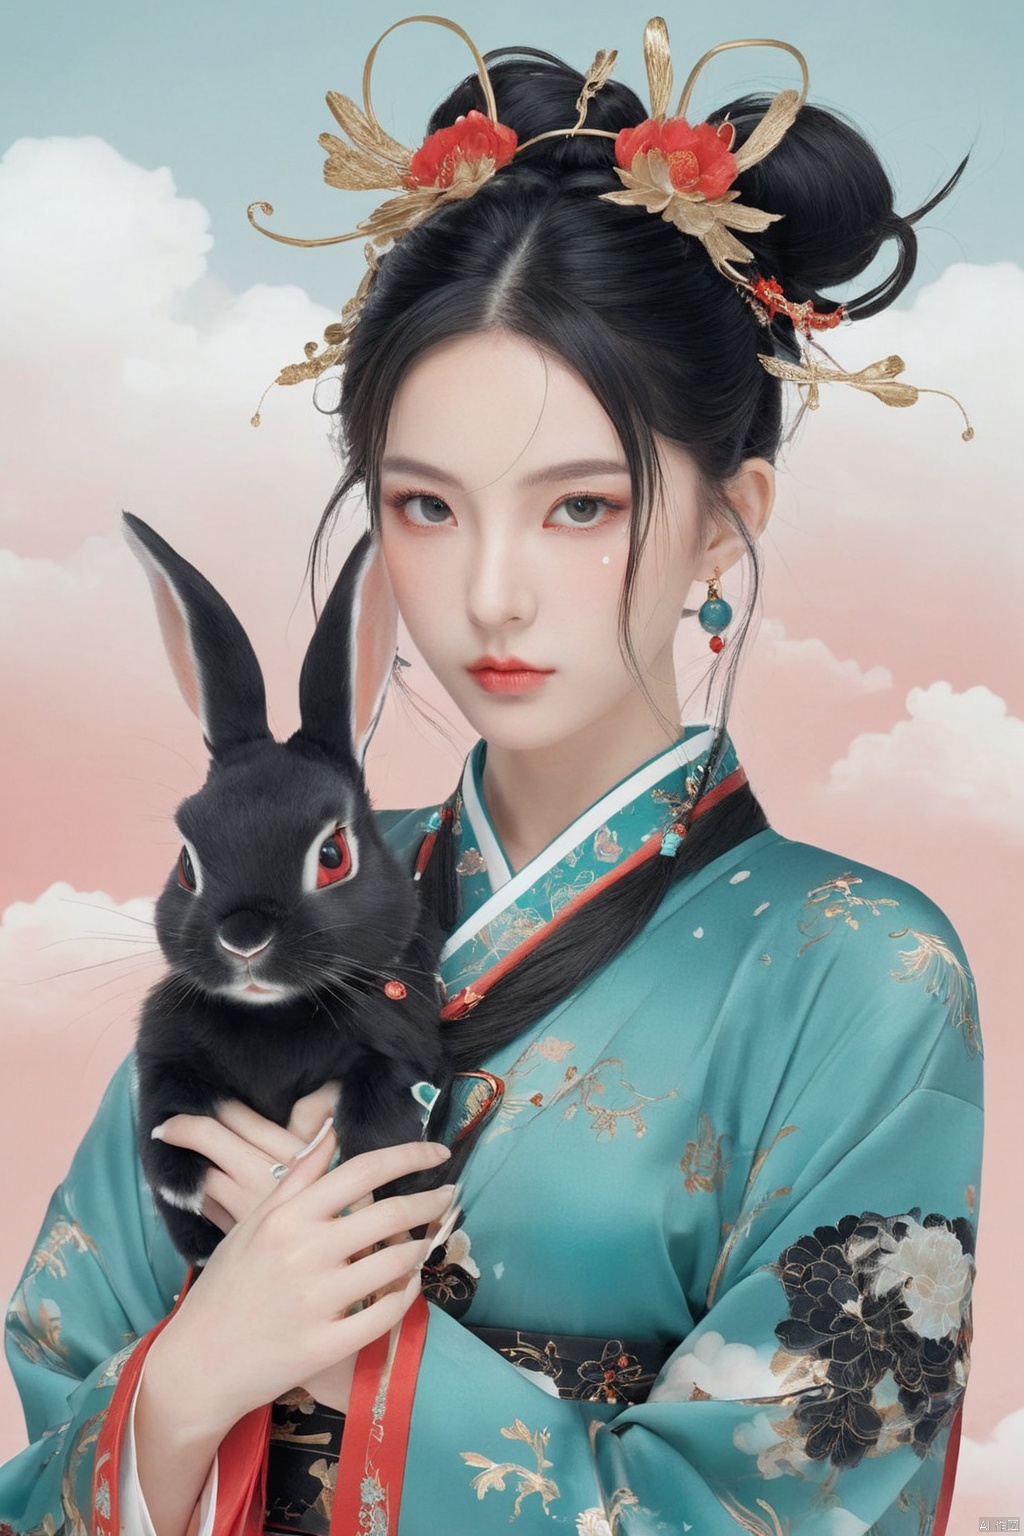  Illustration, digital art, anime style, hubggirl, red eyes, black hair, hair bun with accessories, traditional East Asian attire, rabbit ears headpiece, black and teal clothing, cloud pattern on garment, mystical, two black rabbits, one on shoulder and one in foreground, pale skin, blush on cheeks, serious expression, white background, portrait, upper body shot, artful composition, detailed line art, vibrant color contrast., HUBG_Beauty_Girl, GUOFENG